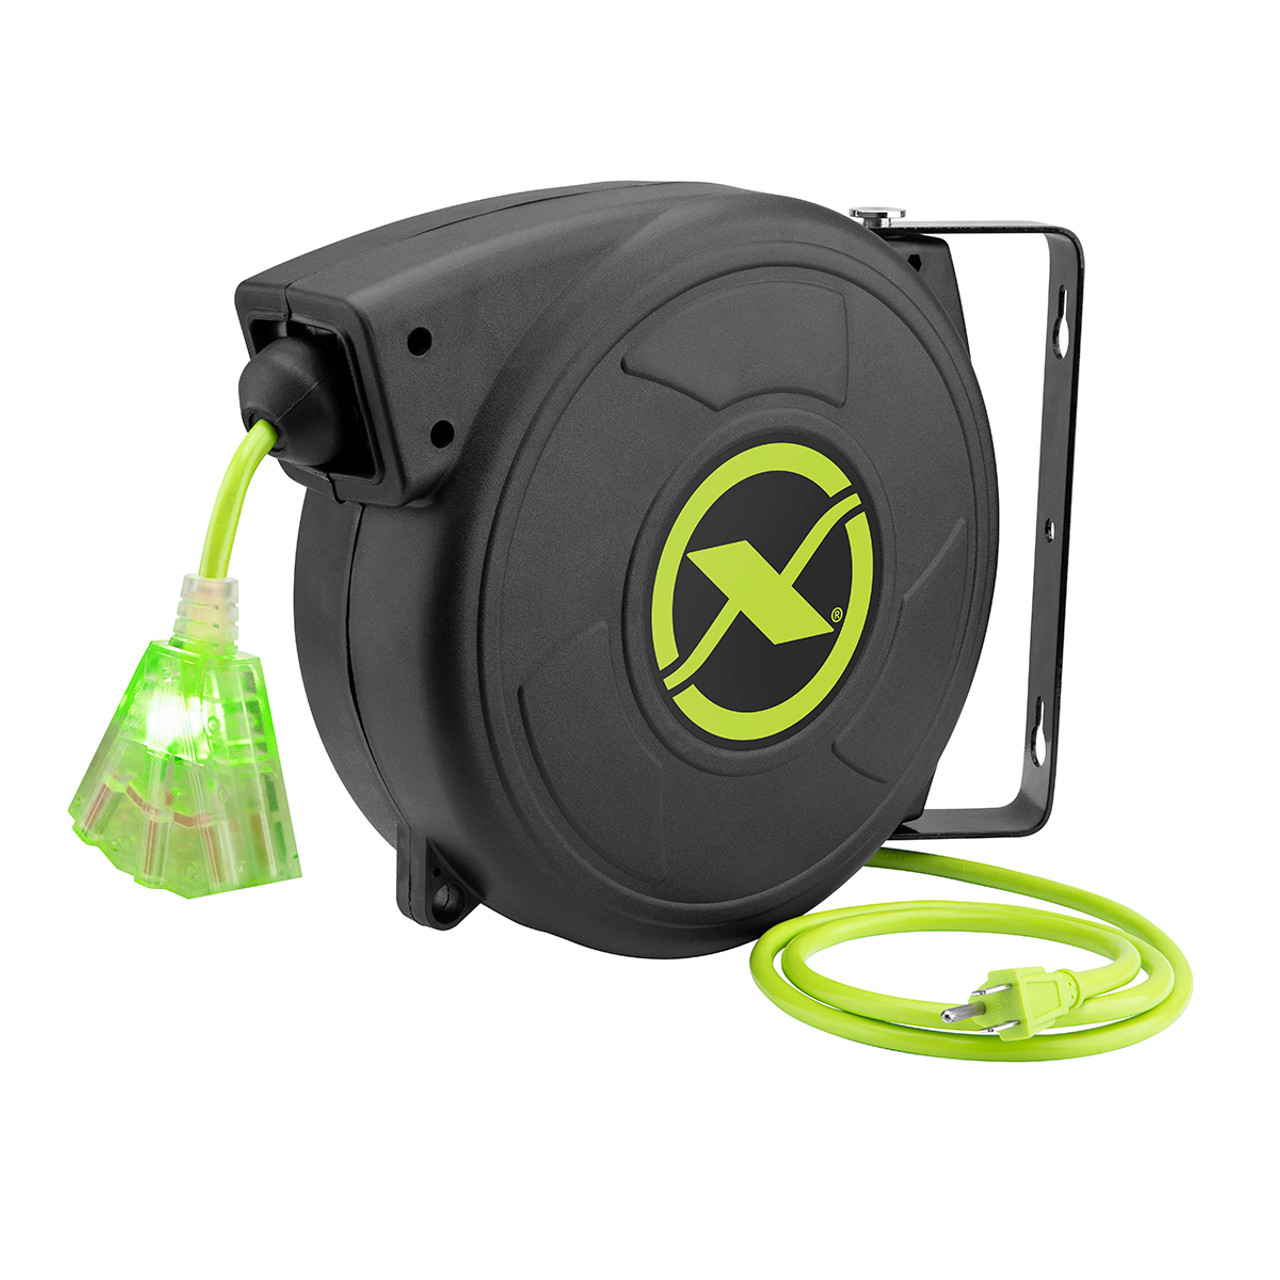 Flexzilla Retractable Extension Cord Reel - 50', 14/3 AWG SJTOW, Grounded Triple Tap Outlet